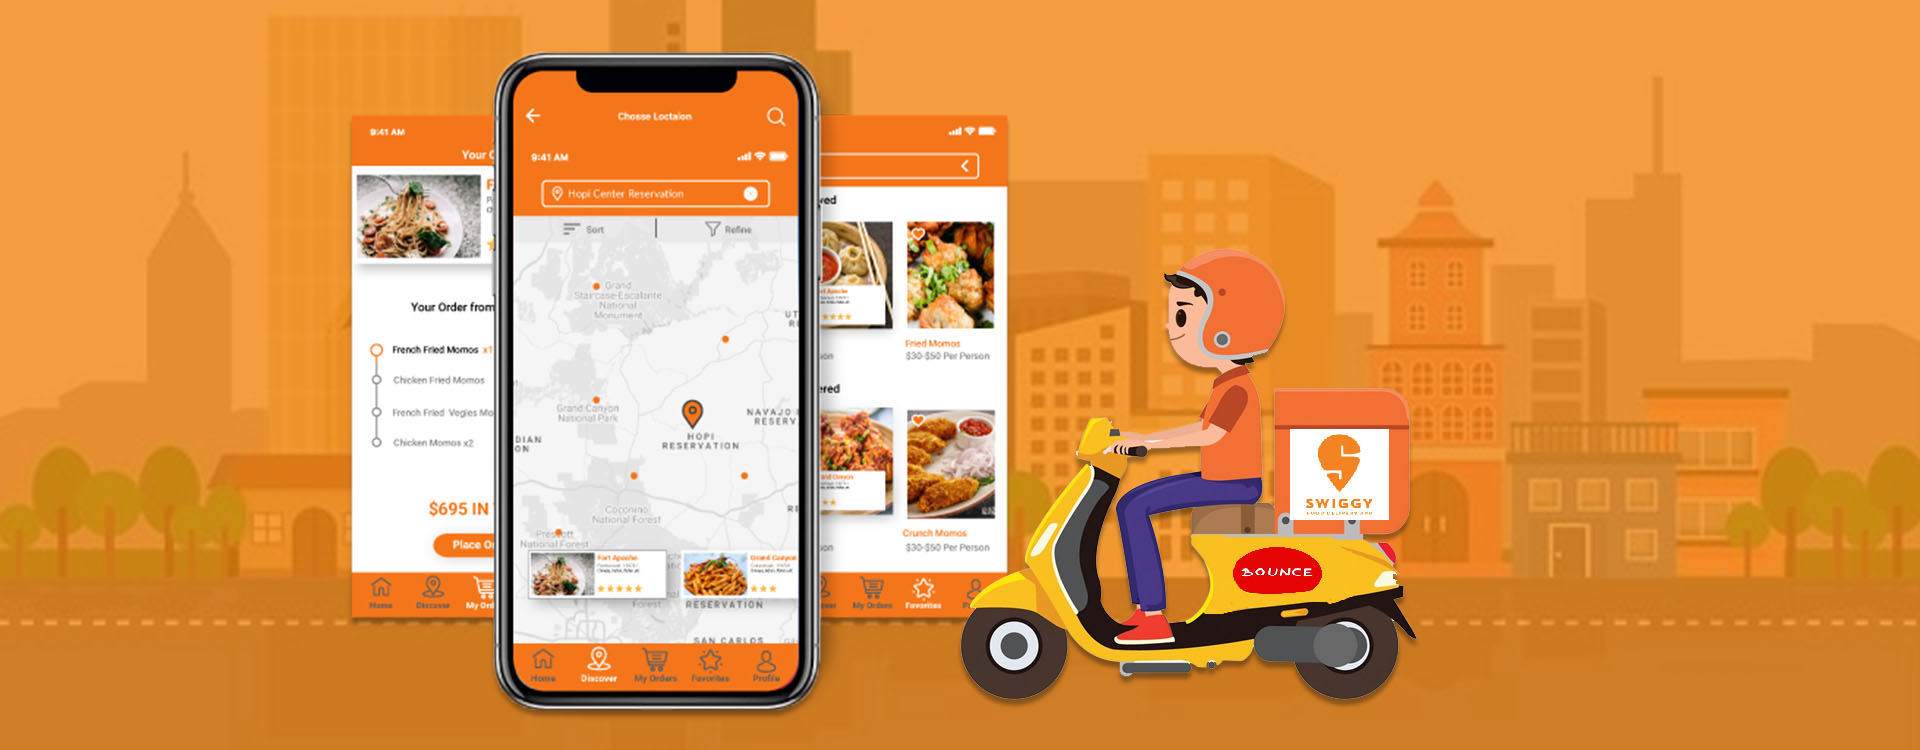 How Swiggy Changed the Online Food Ordering Industry